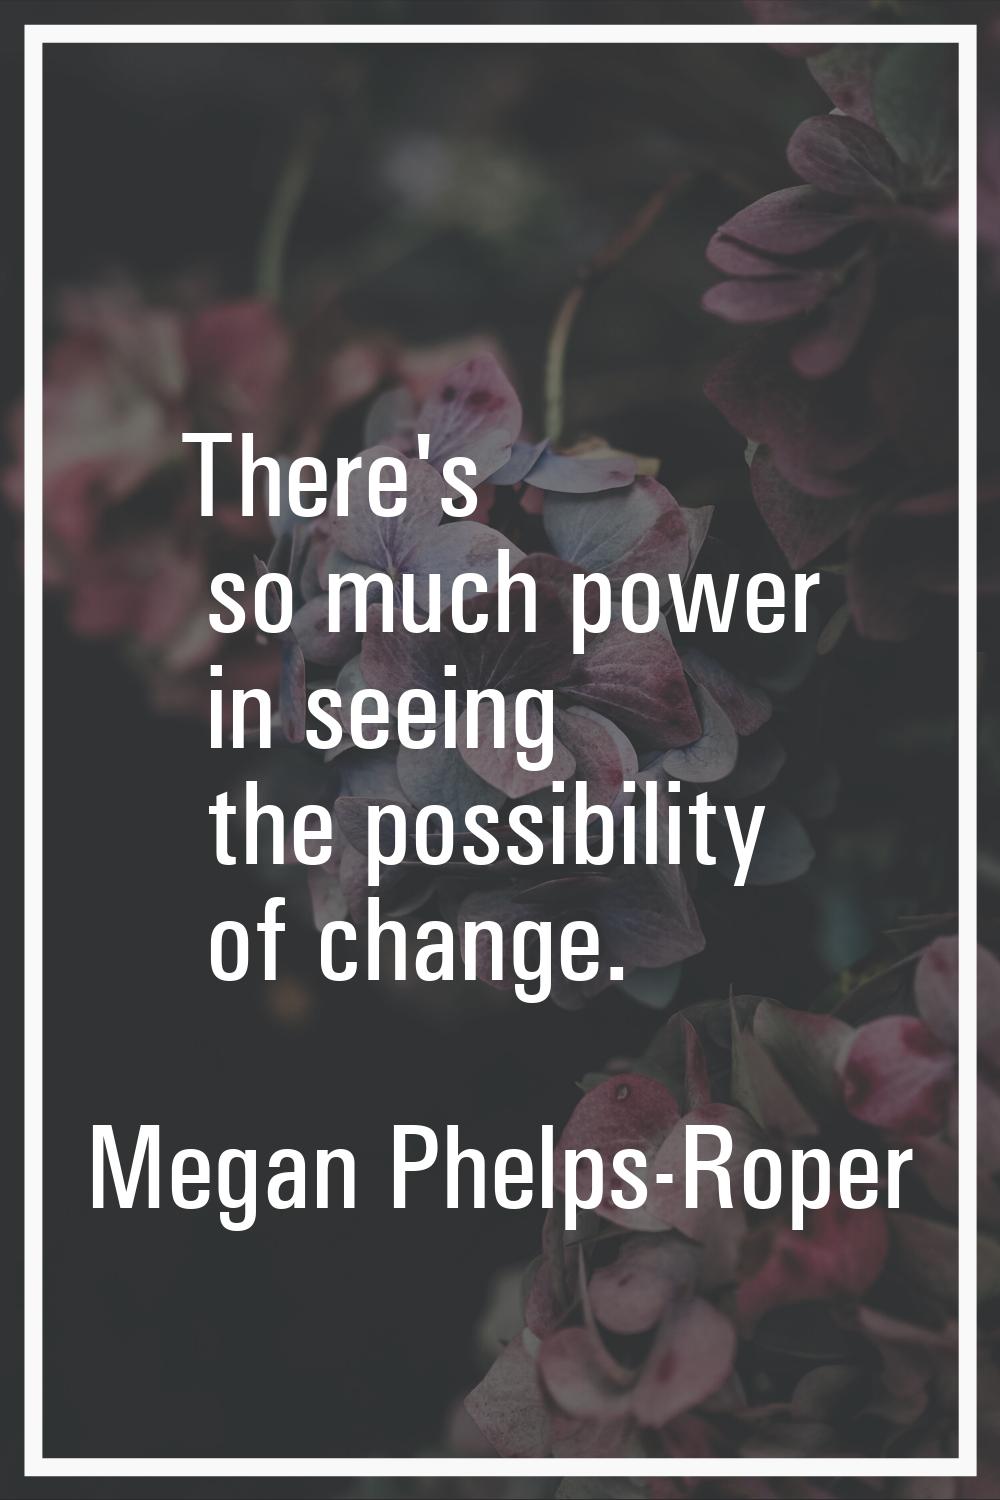 There's so much power in seeing the possibility of change.